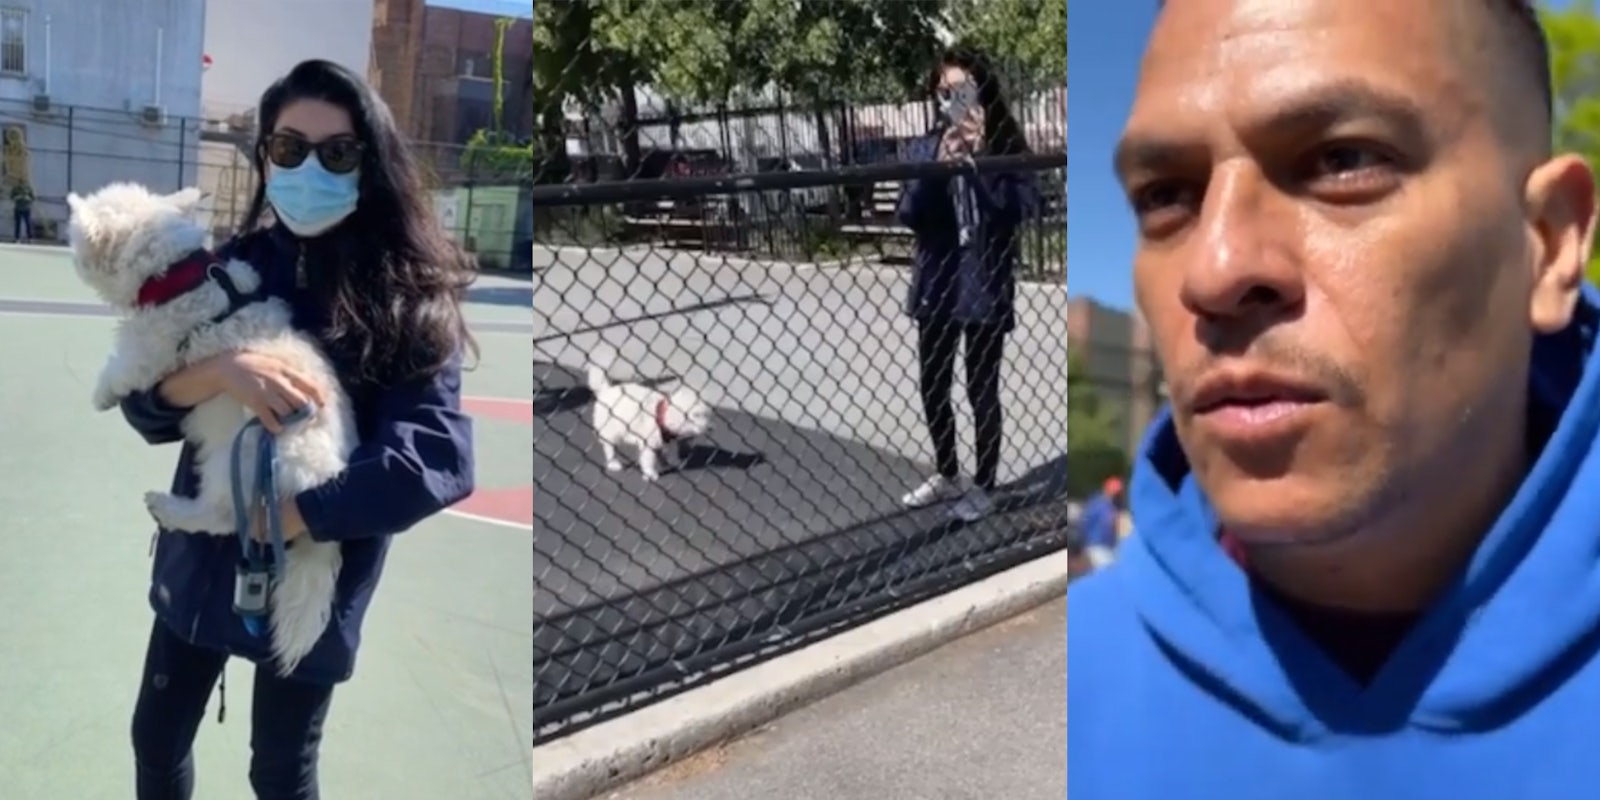 woman holding dog off leash (l) woman taking video through a fence with dog off leash (c) upset man in blue hoodie approaches (r)